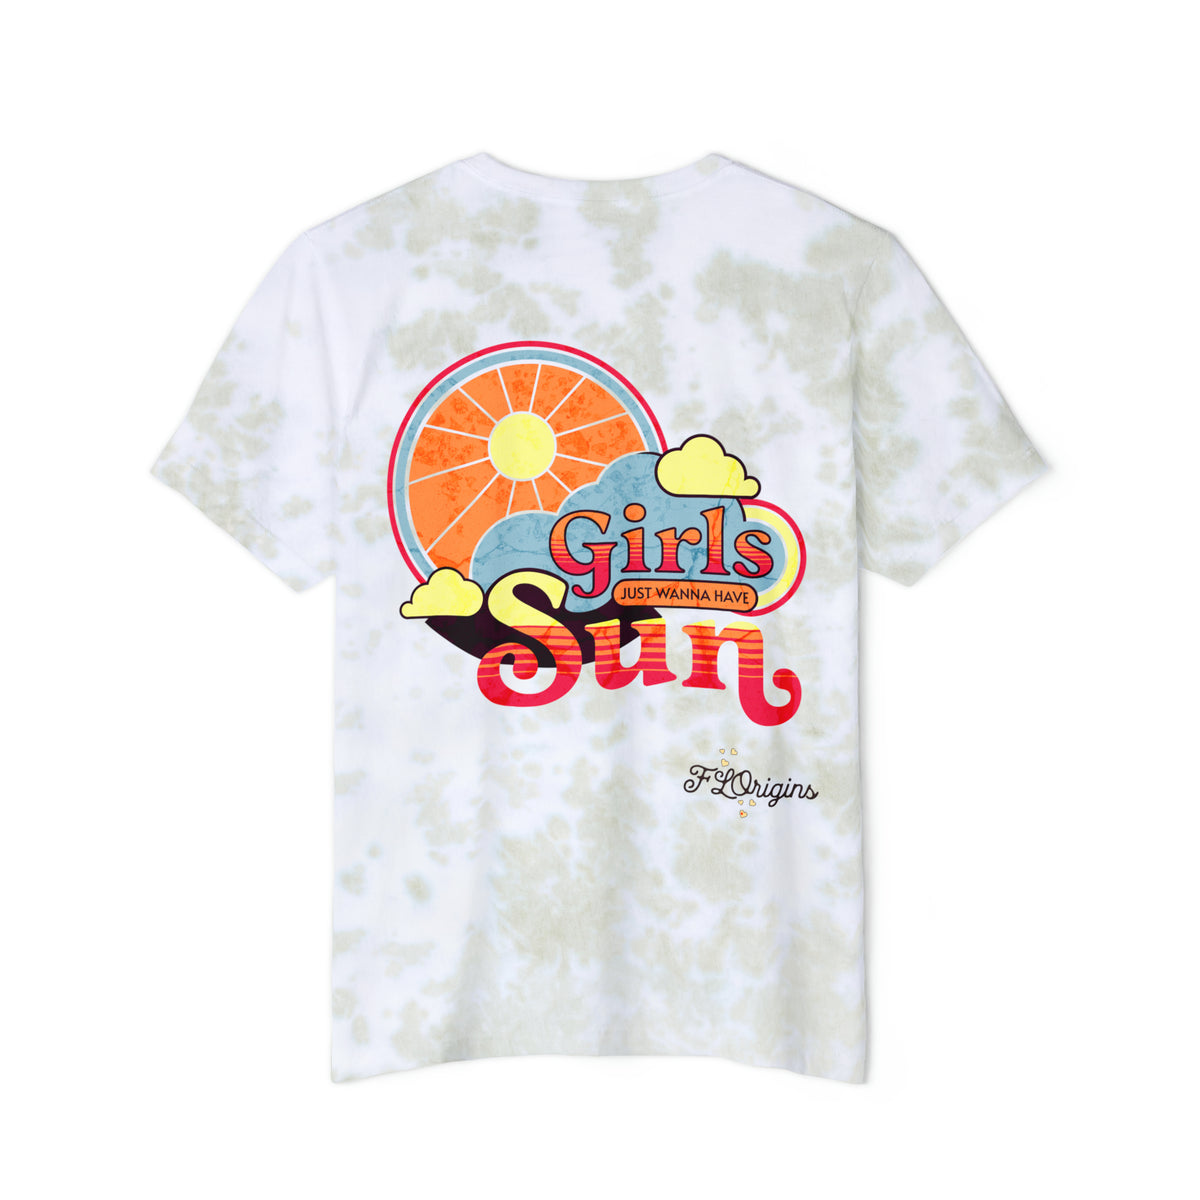 Girls Just Wanna Have Sun Women's Tie-Dye Relaxed Fit Tee